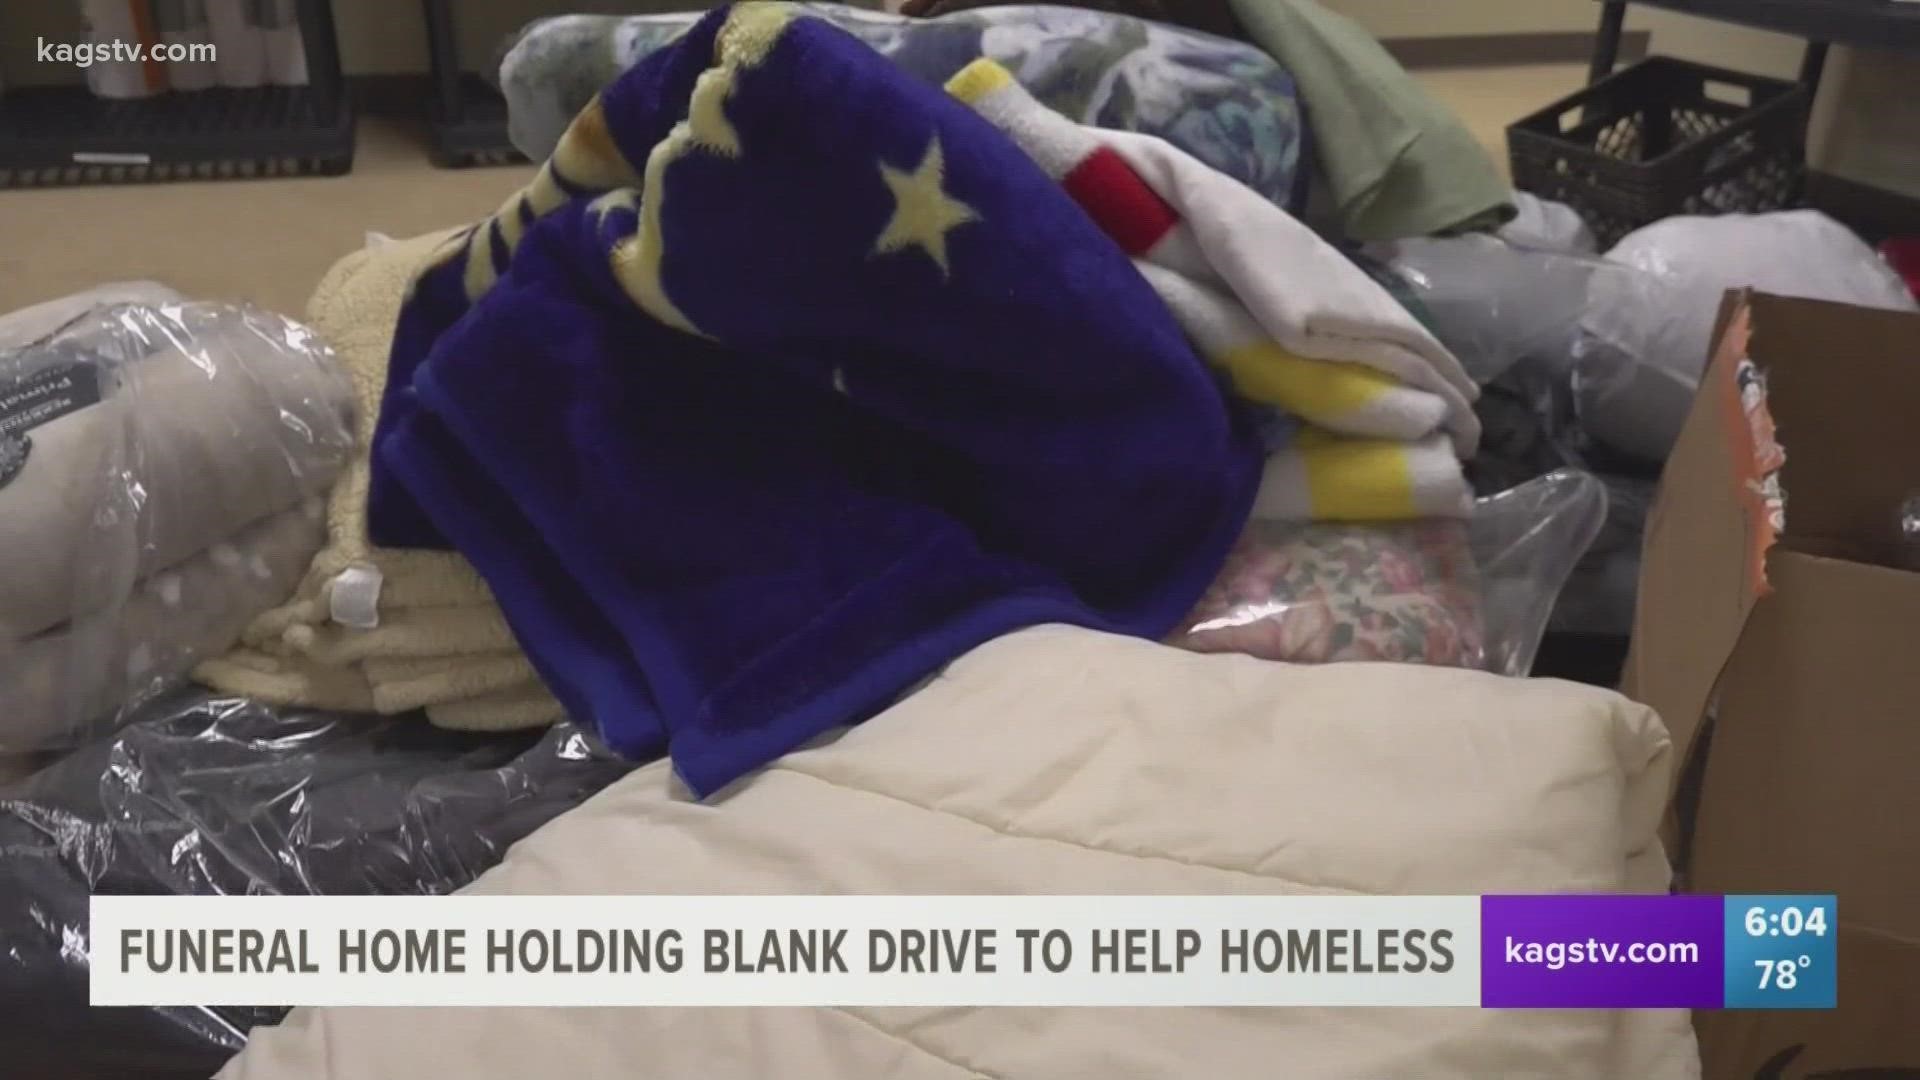 The yearly drive began after the home heard stories of many homeless folks going cold and falling ill during the holiday season